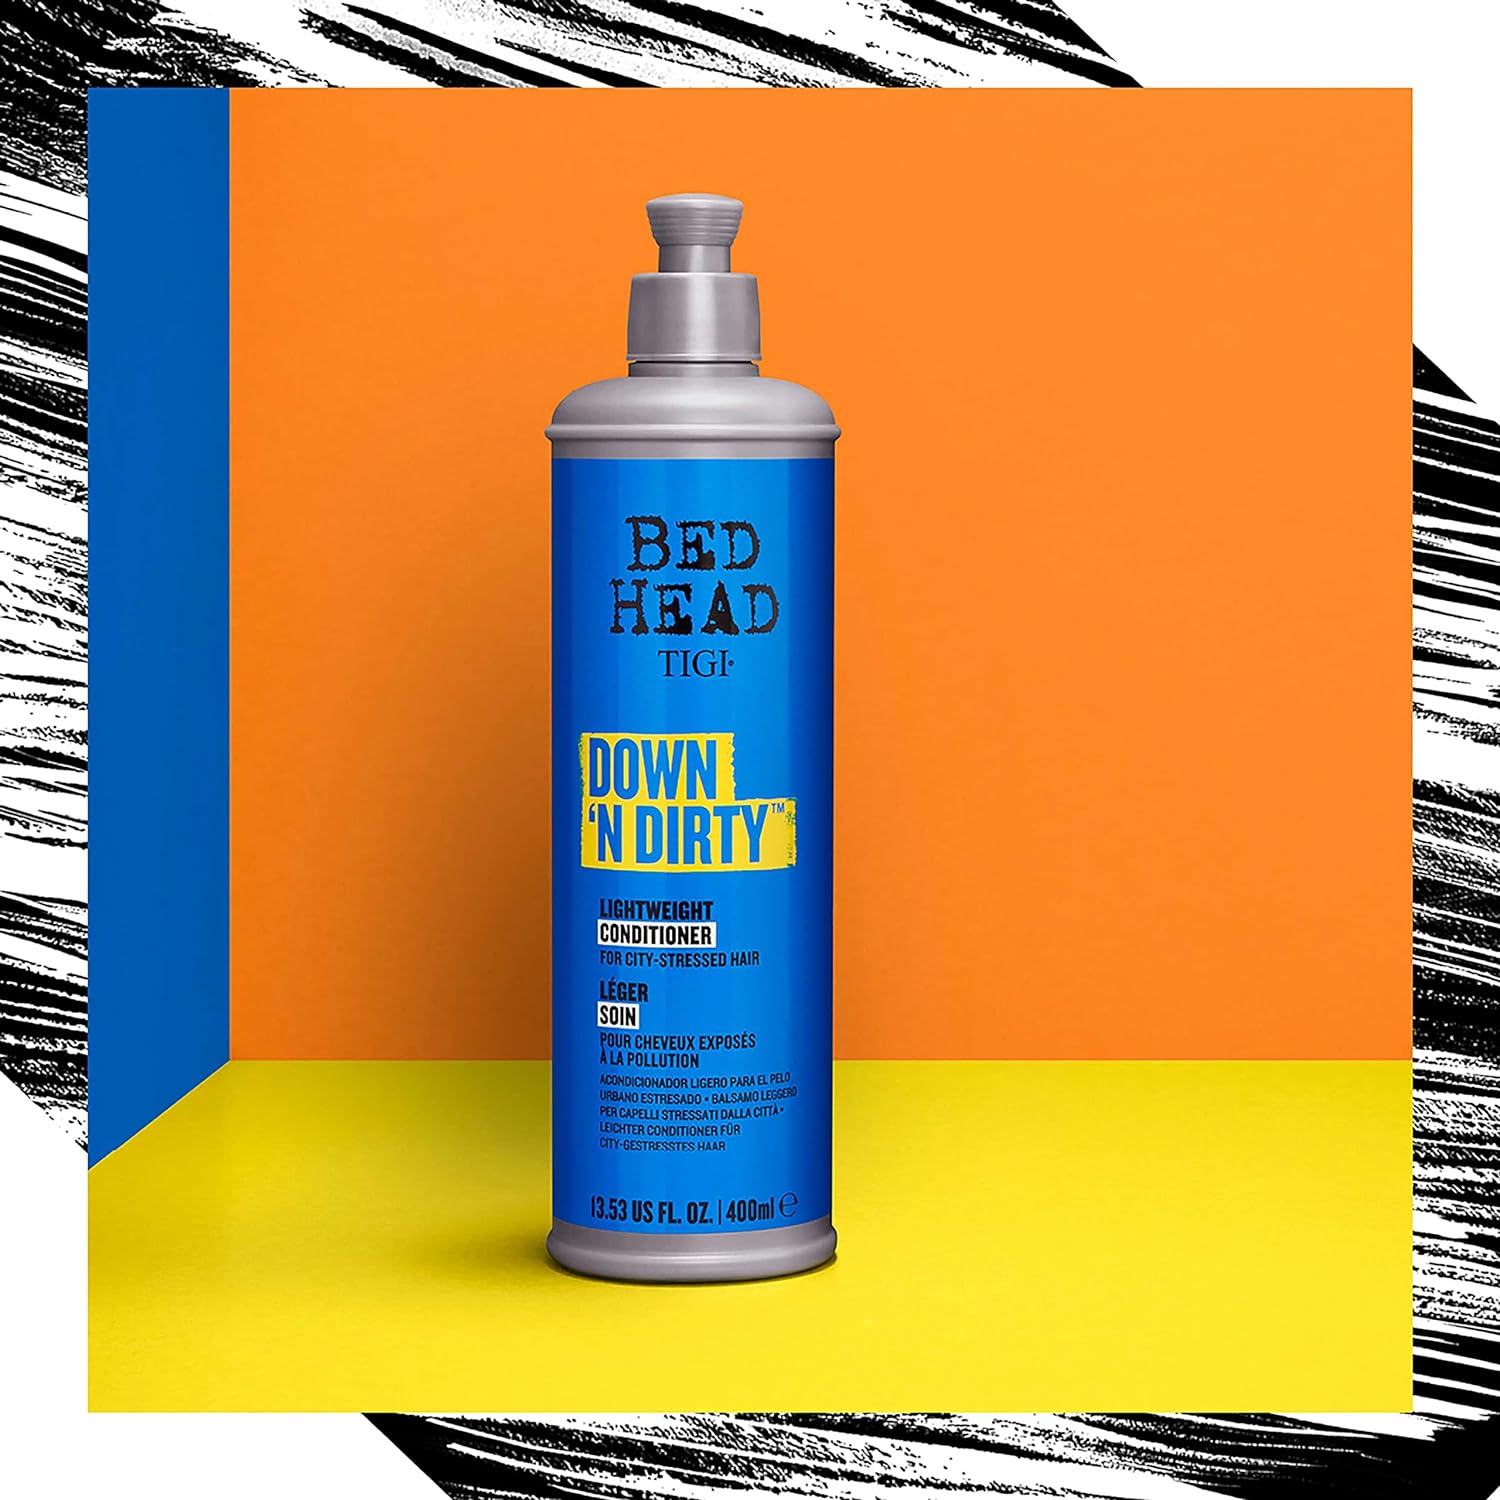 TIGI Bed Head Down N' Dirty Lightweight Conditioner for Detox and Repair 20.29 fl oz : Beauty & Personal Care